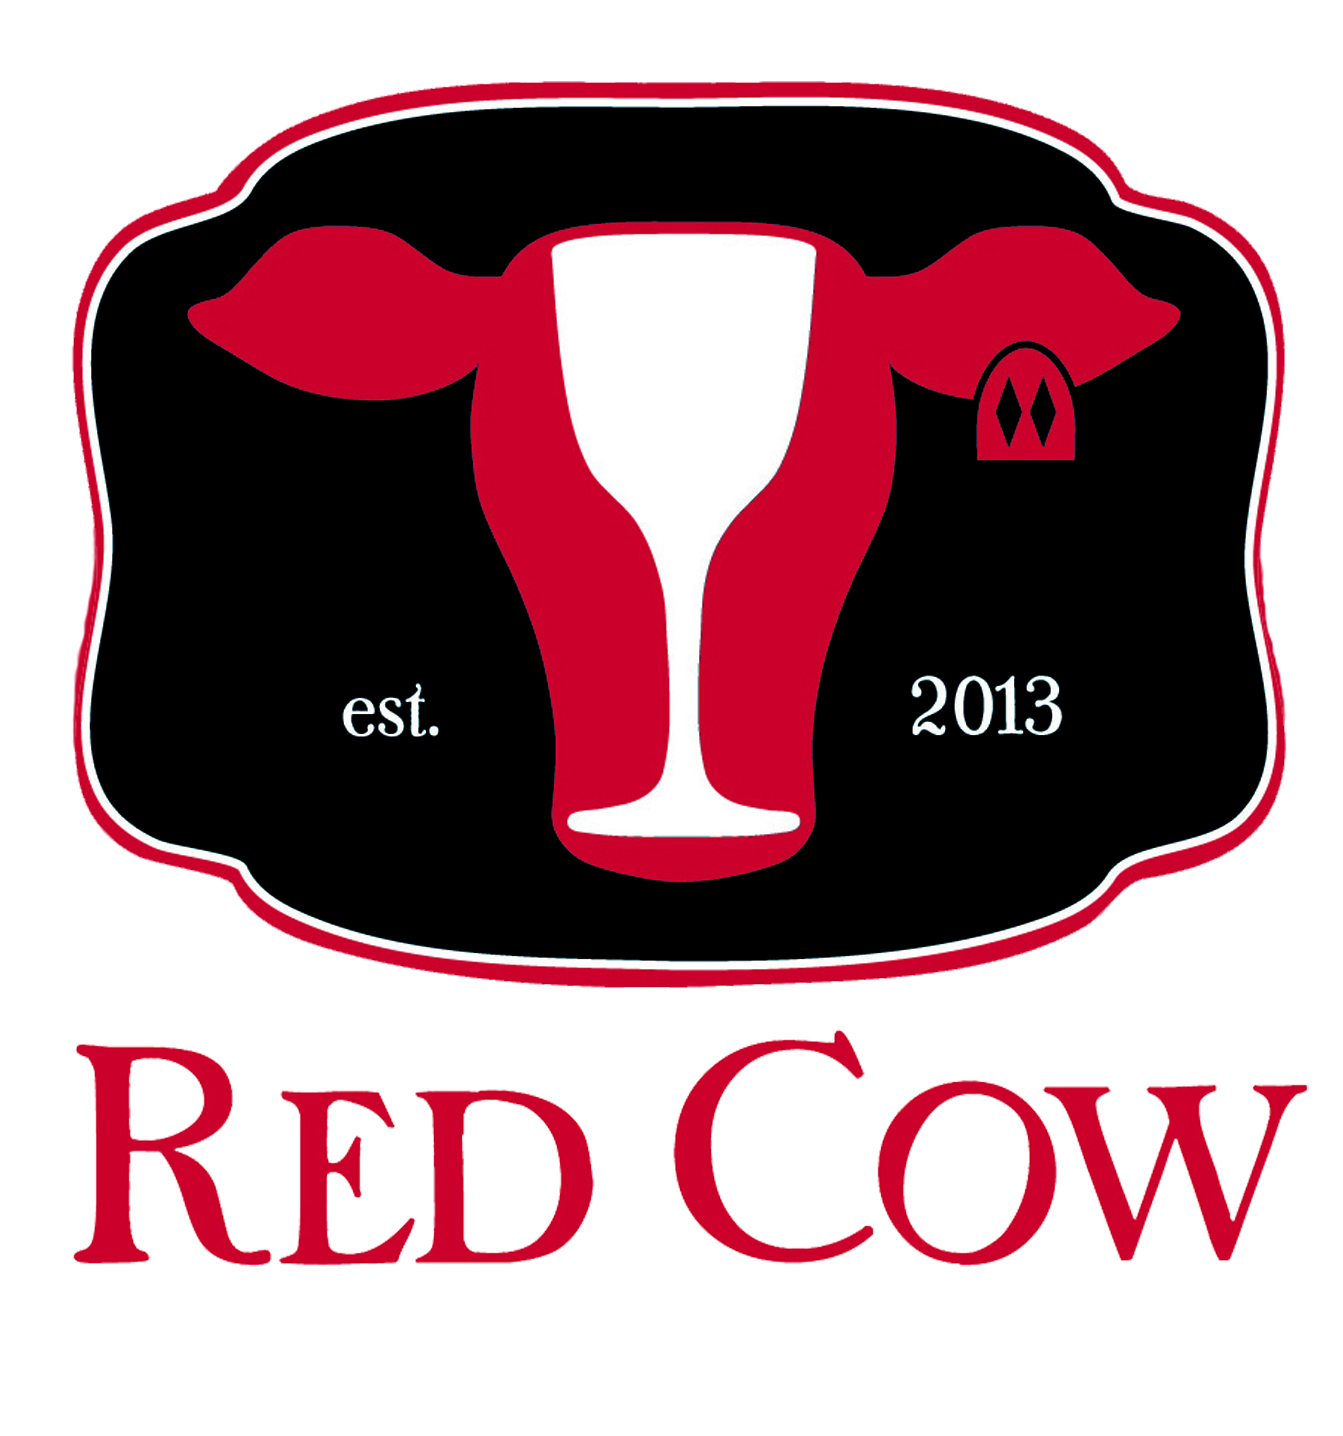 Red cow